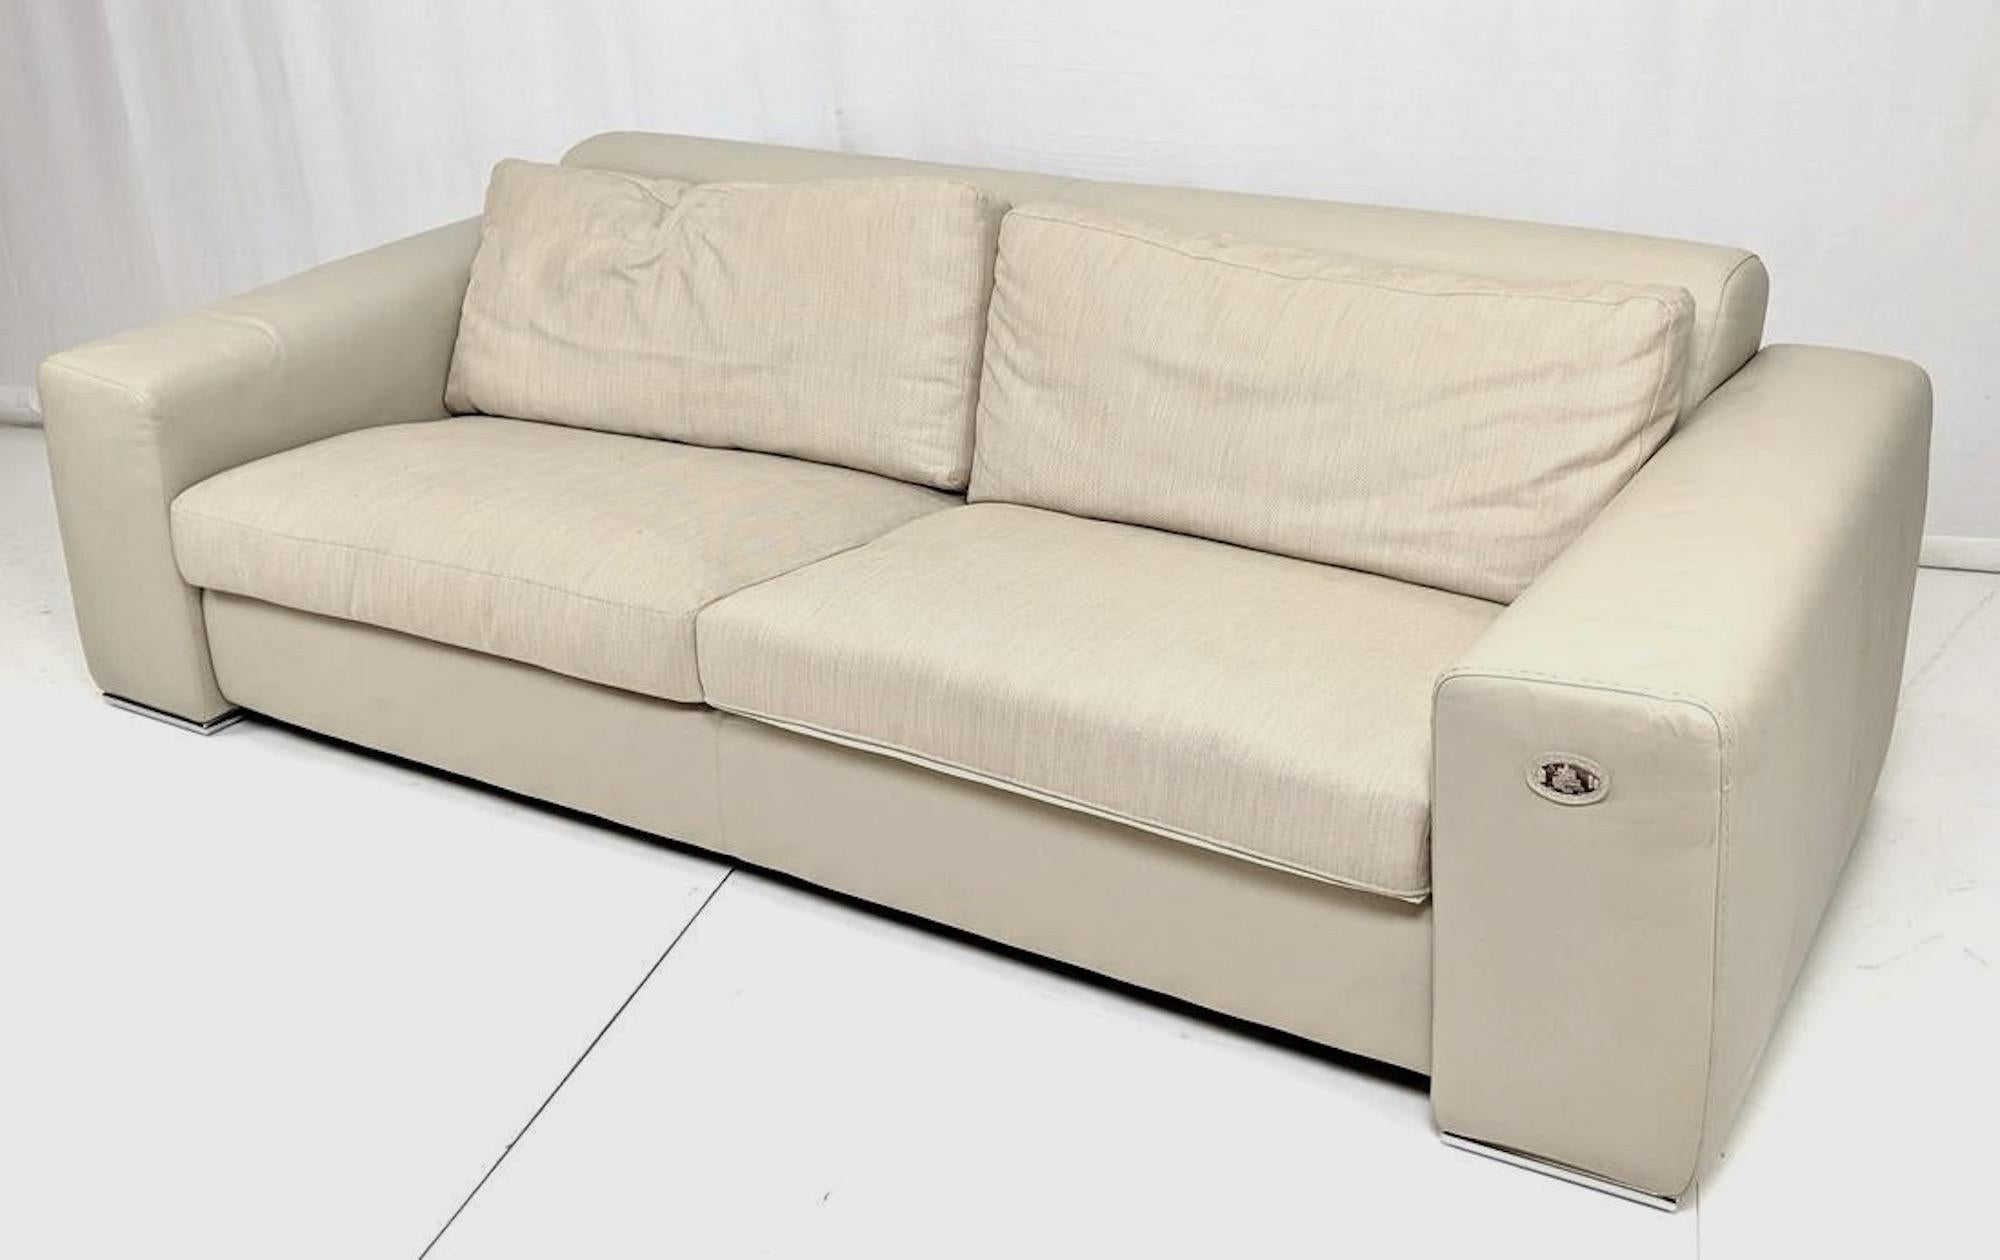 Fendi leather sofa in Taupe leather, signed, with serial number, linen seats for cool, luxurious comfort and buttery smooth leather, handstitched covers the body and frame. Retail price for this  sofa is over 21,000 USD. Made in Italy. Sterling